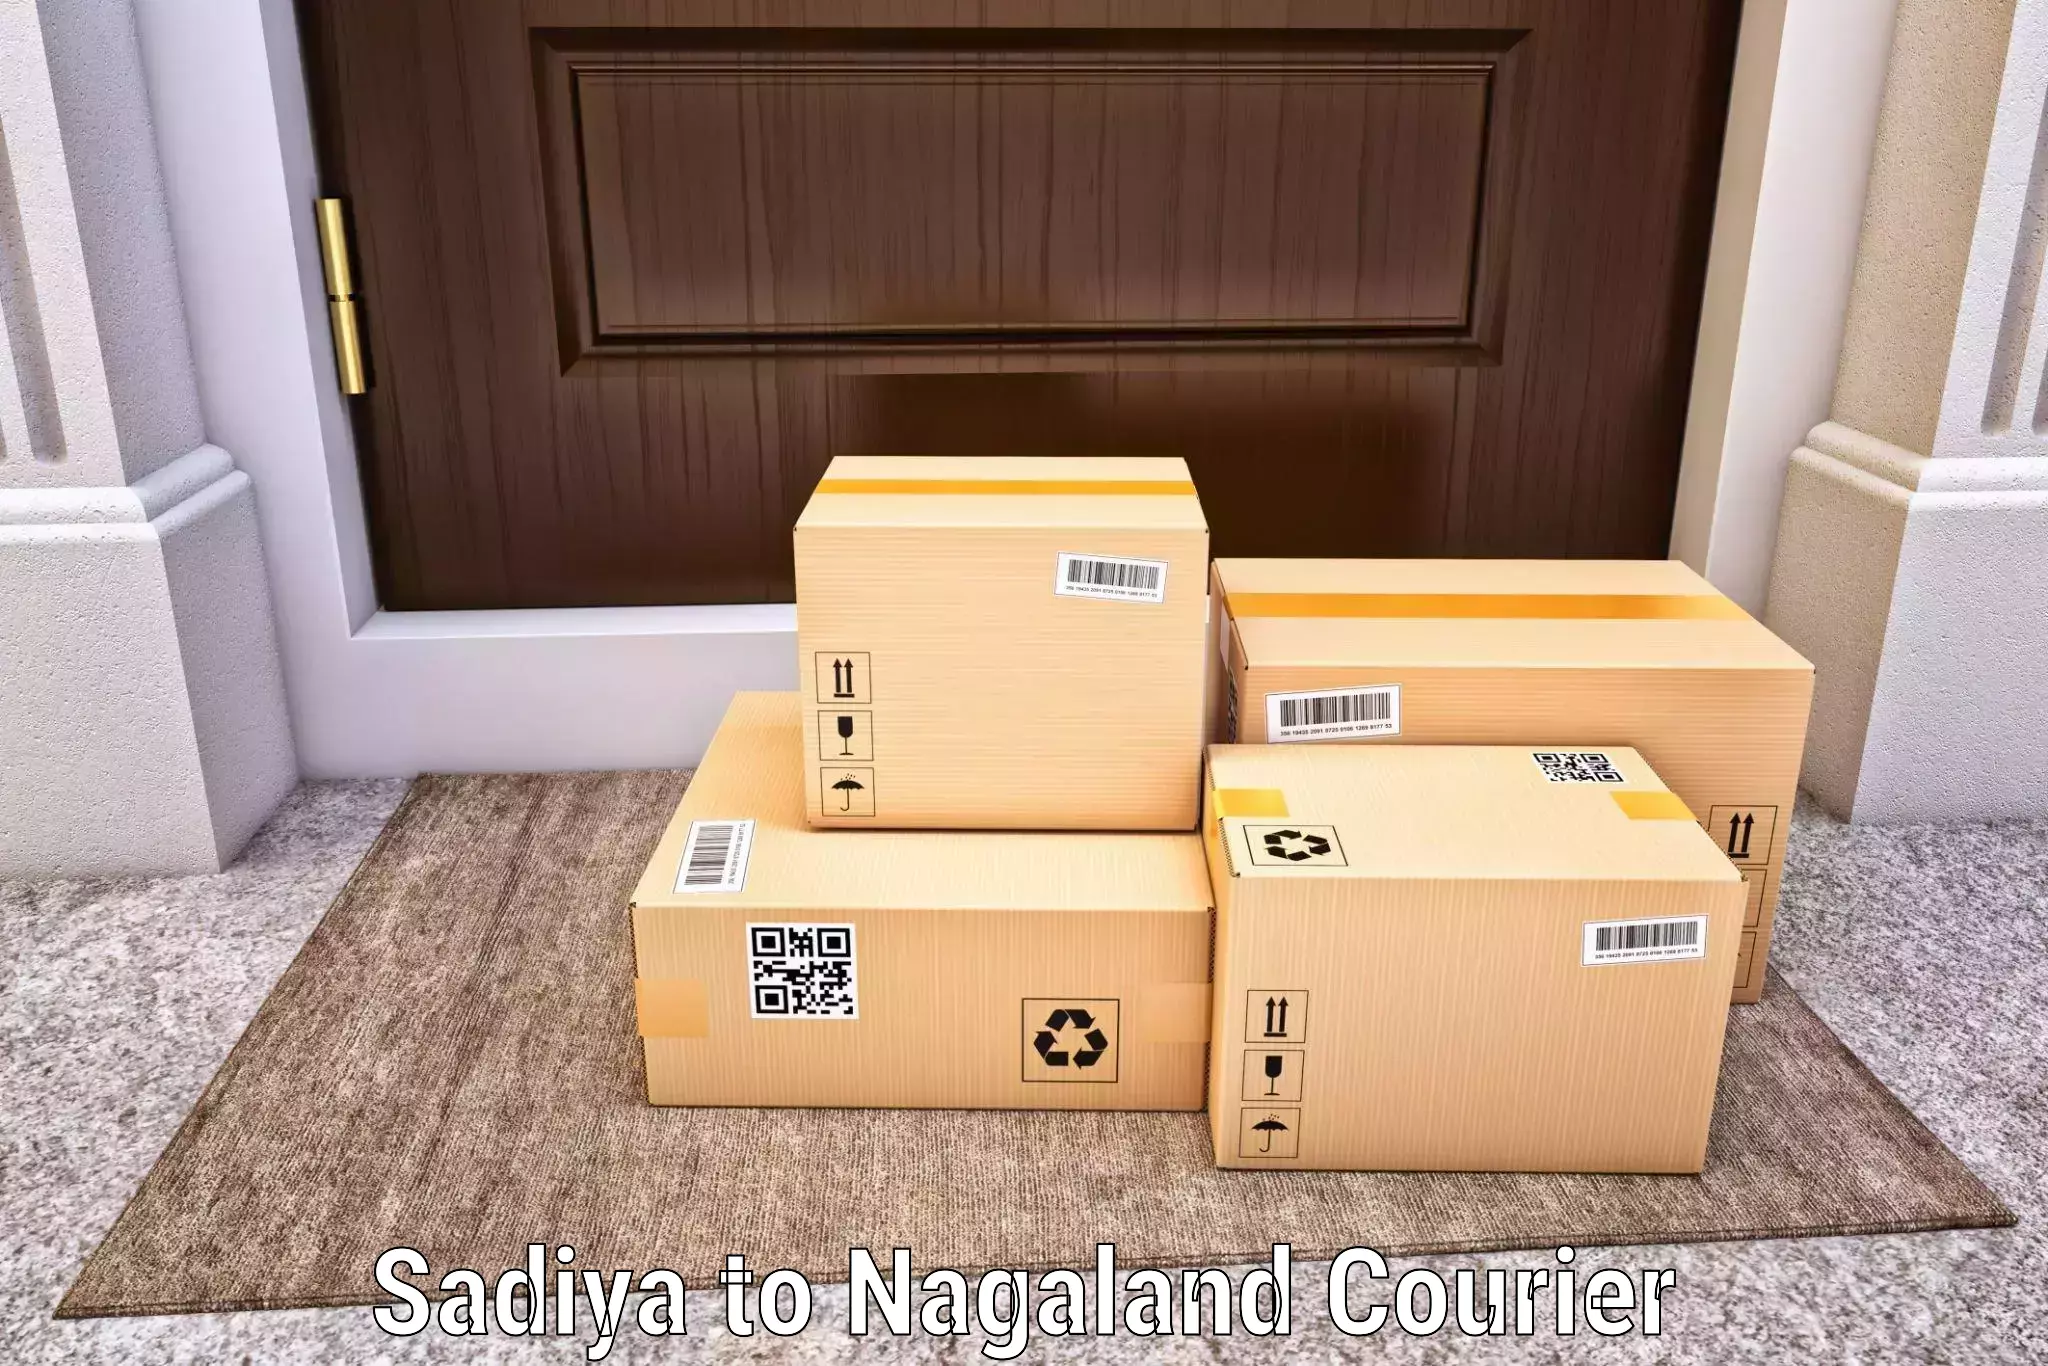 Courier service comparison in Sadiya to Peren